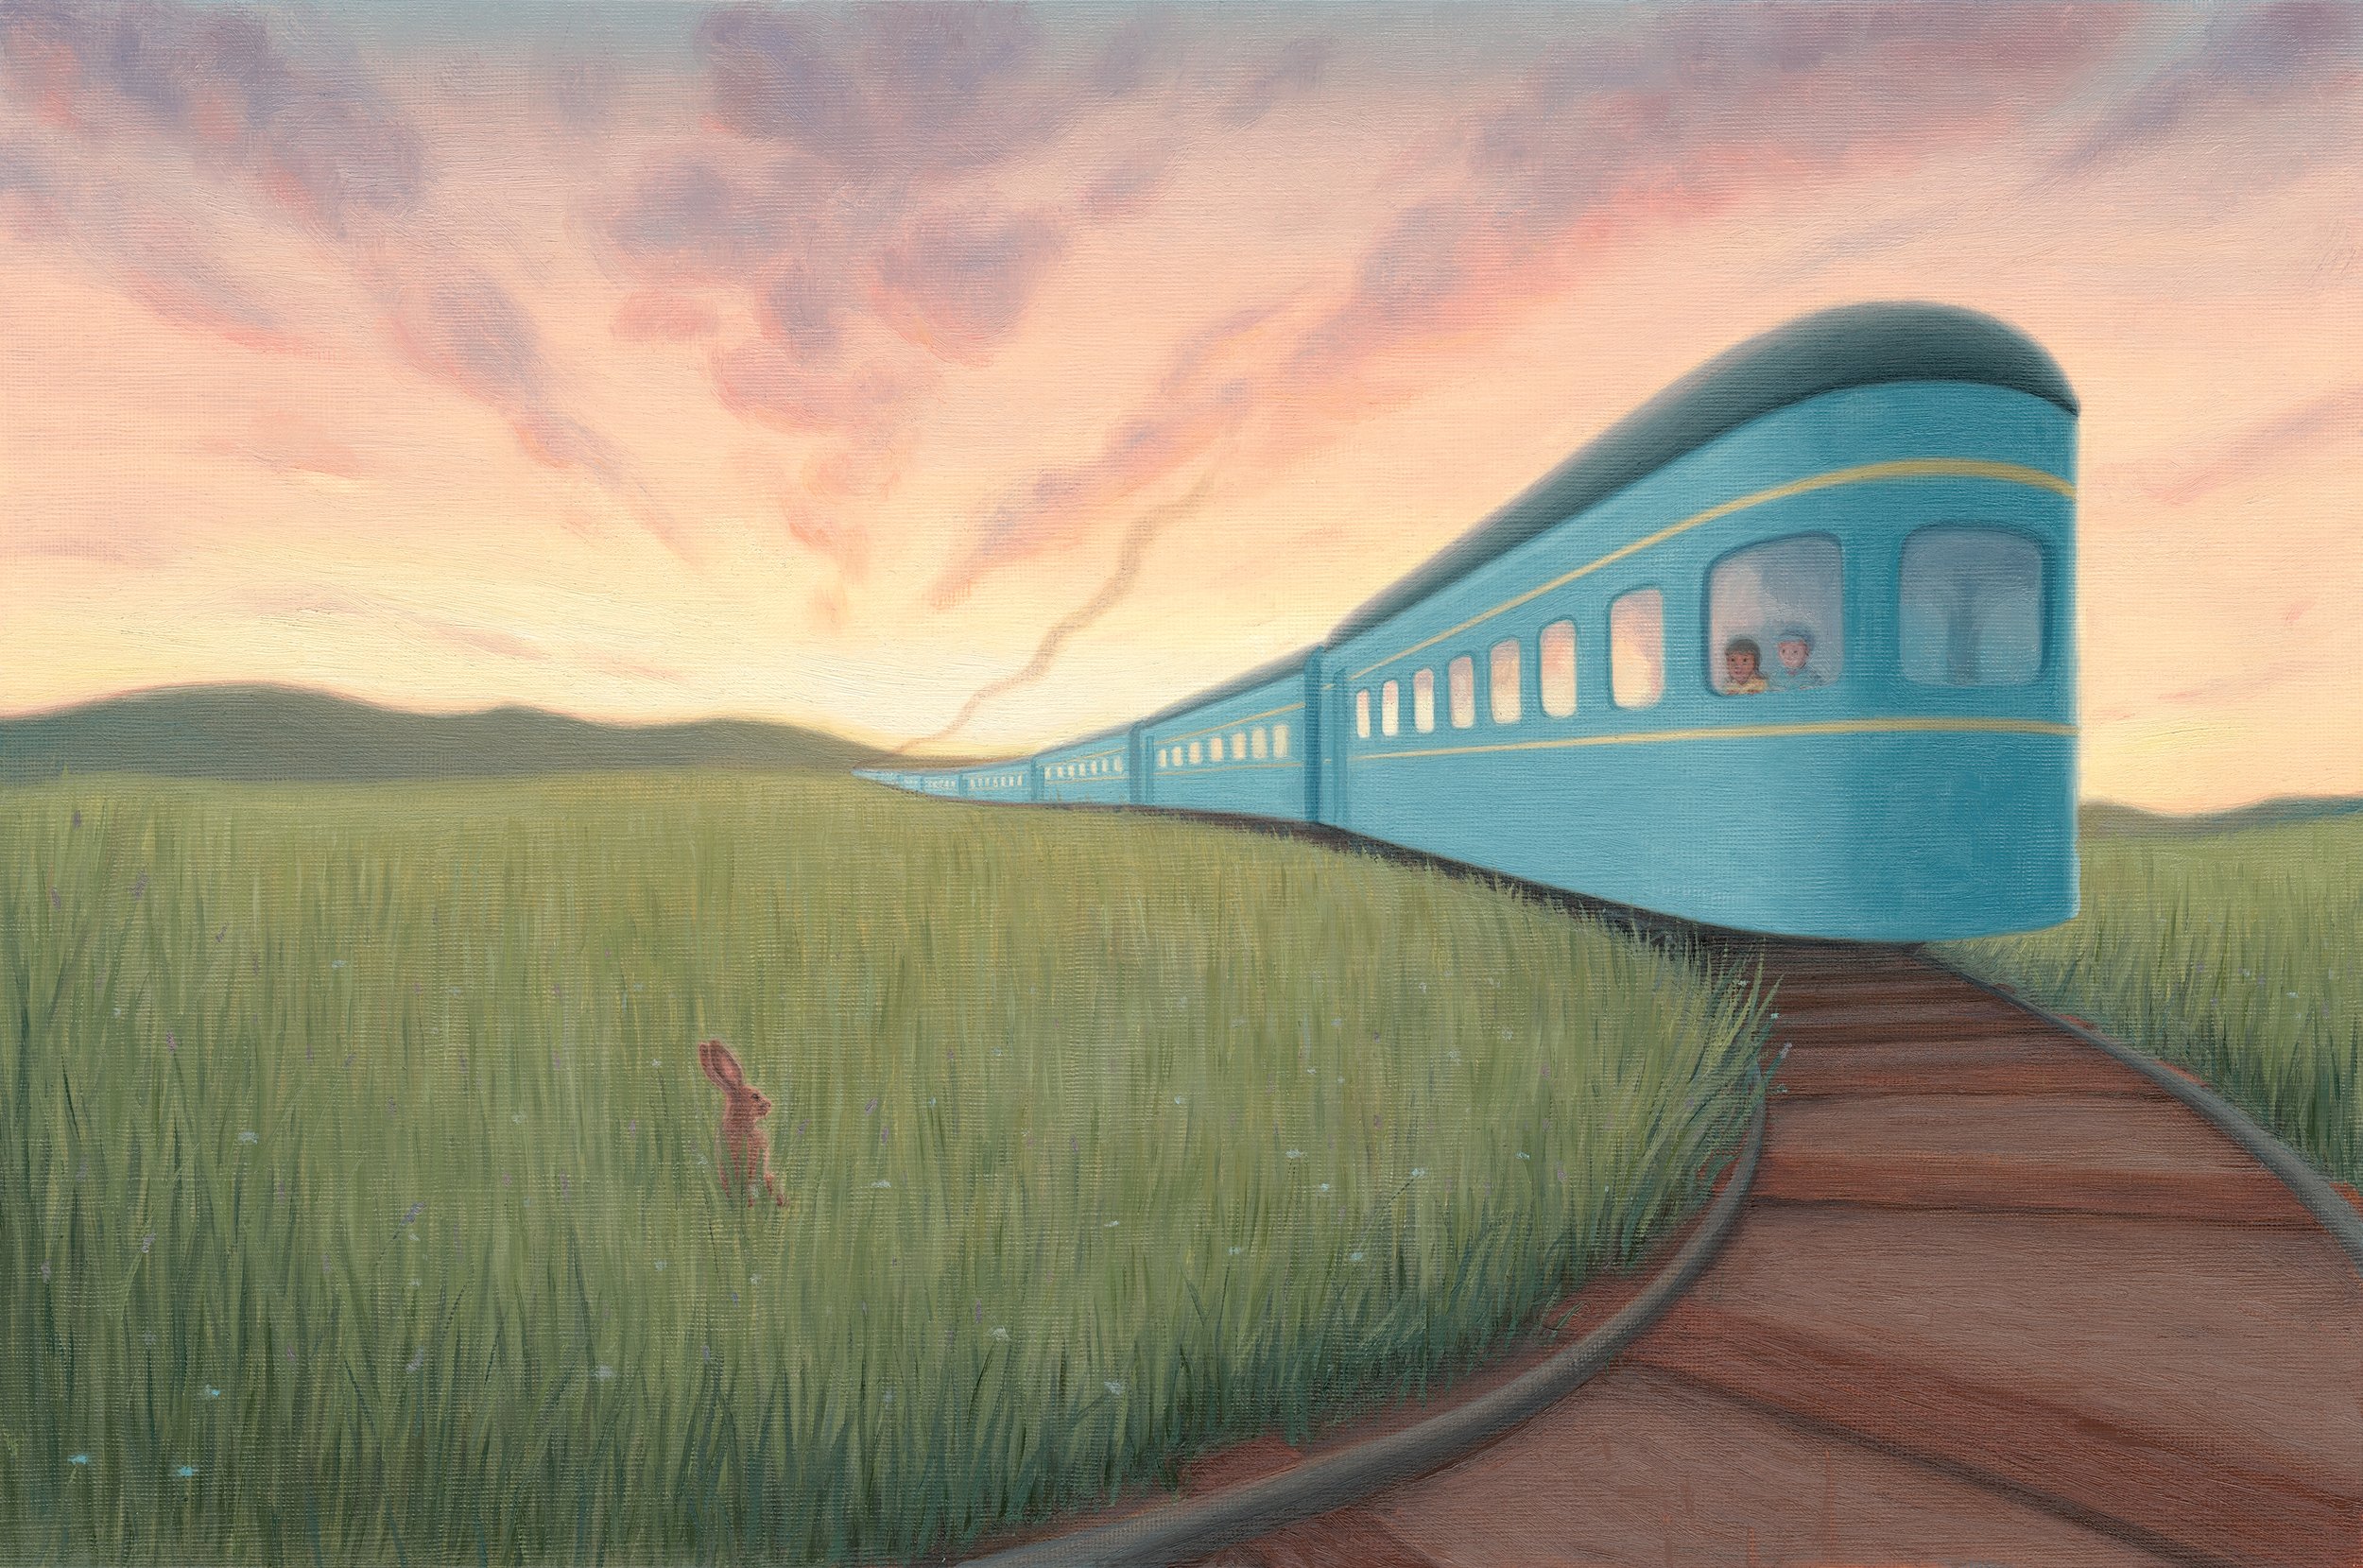 Deirdre Gill; "Journey Home," 2017; Oil on canvas paper; From "Trains Don’t Sleep"